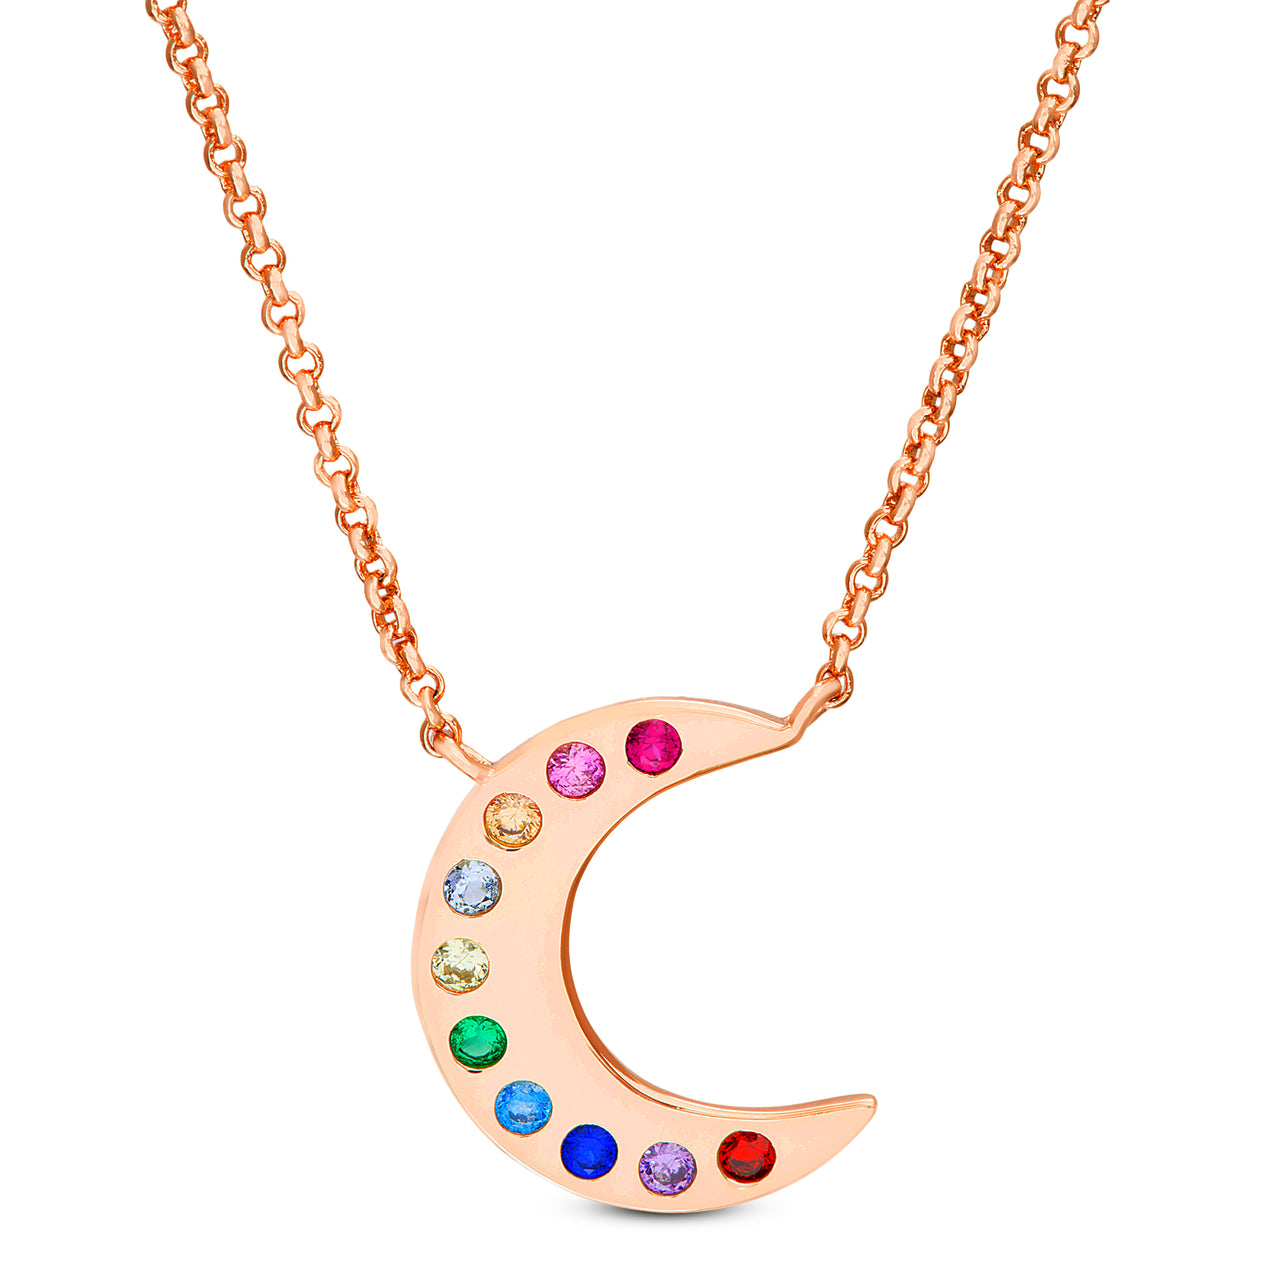 Lesa Michele Rose Gold Plated Sterling Silver Rainbow Cubic Zirconia Crescent Moon Necklace